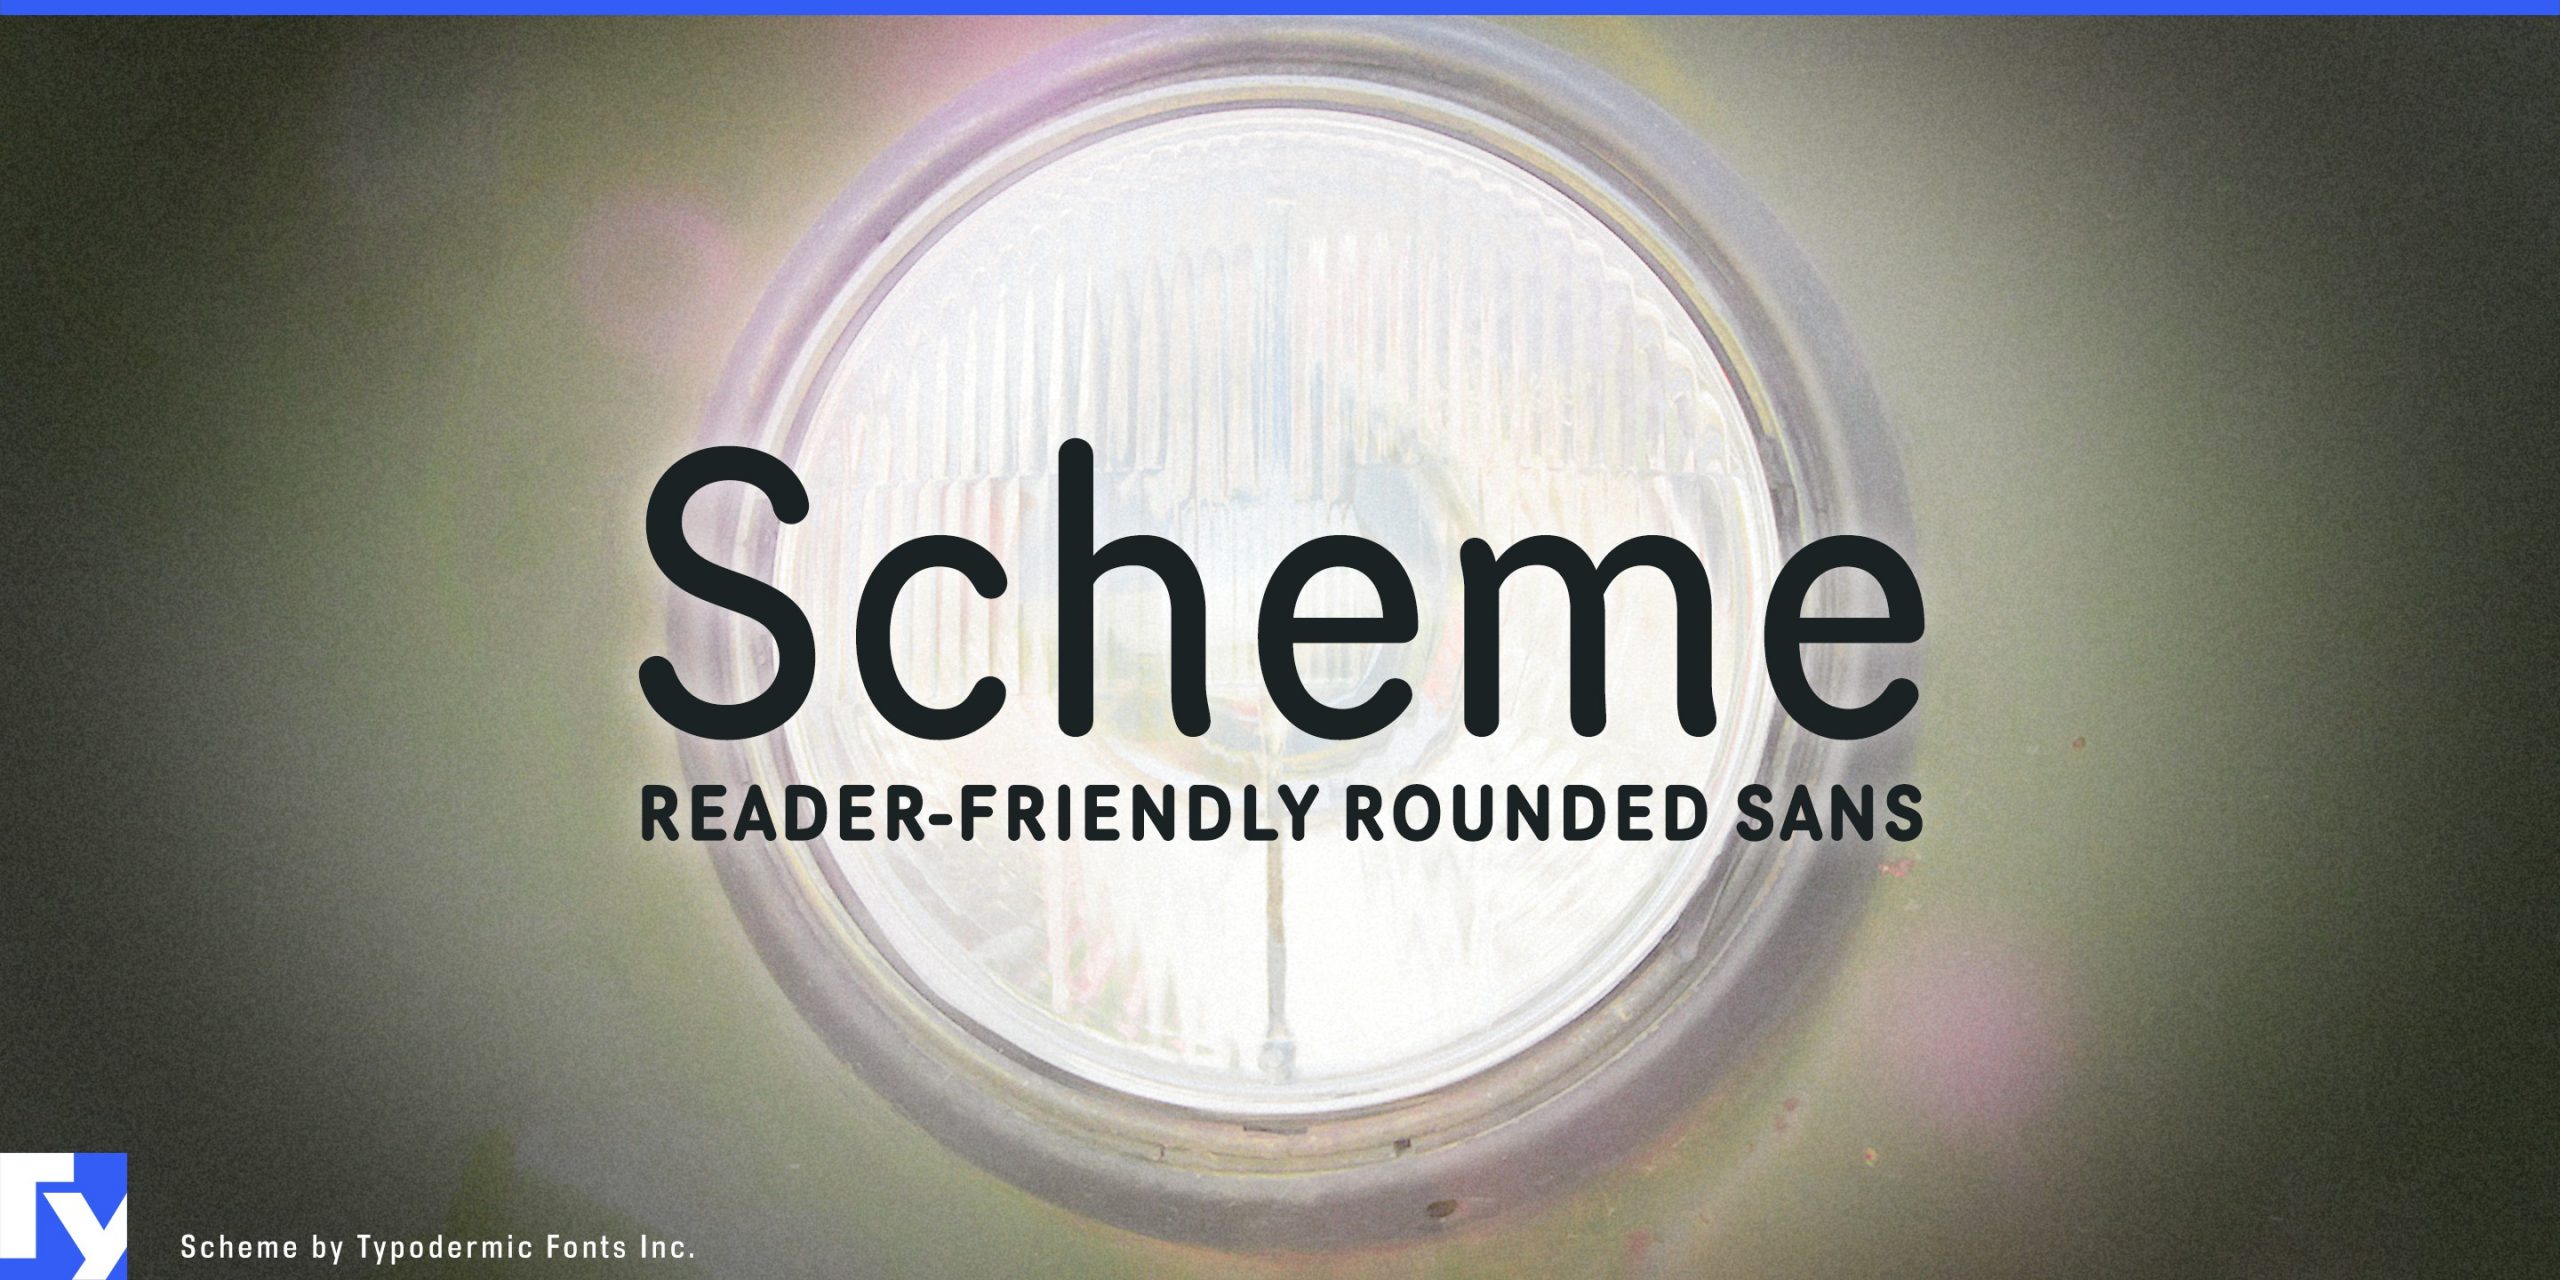 Creamy appearance adds sophistication to your designs with Schem